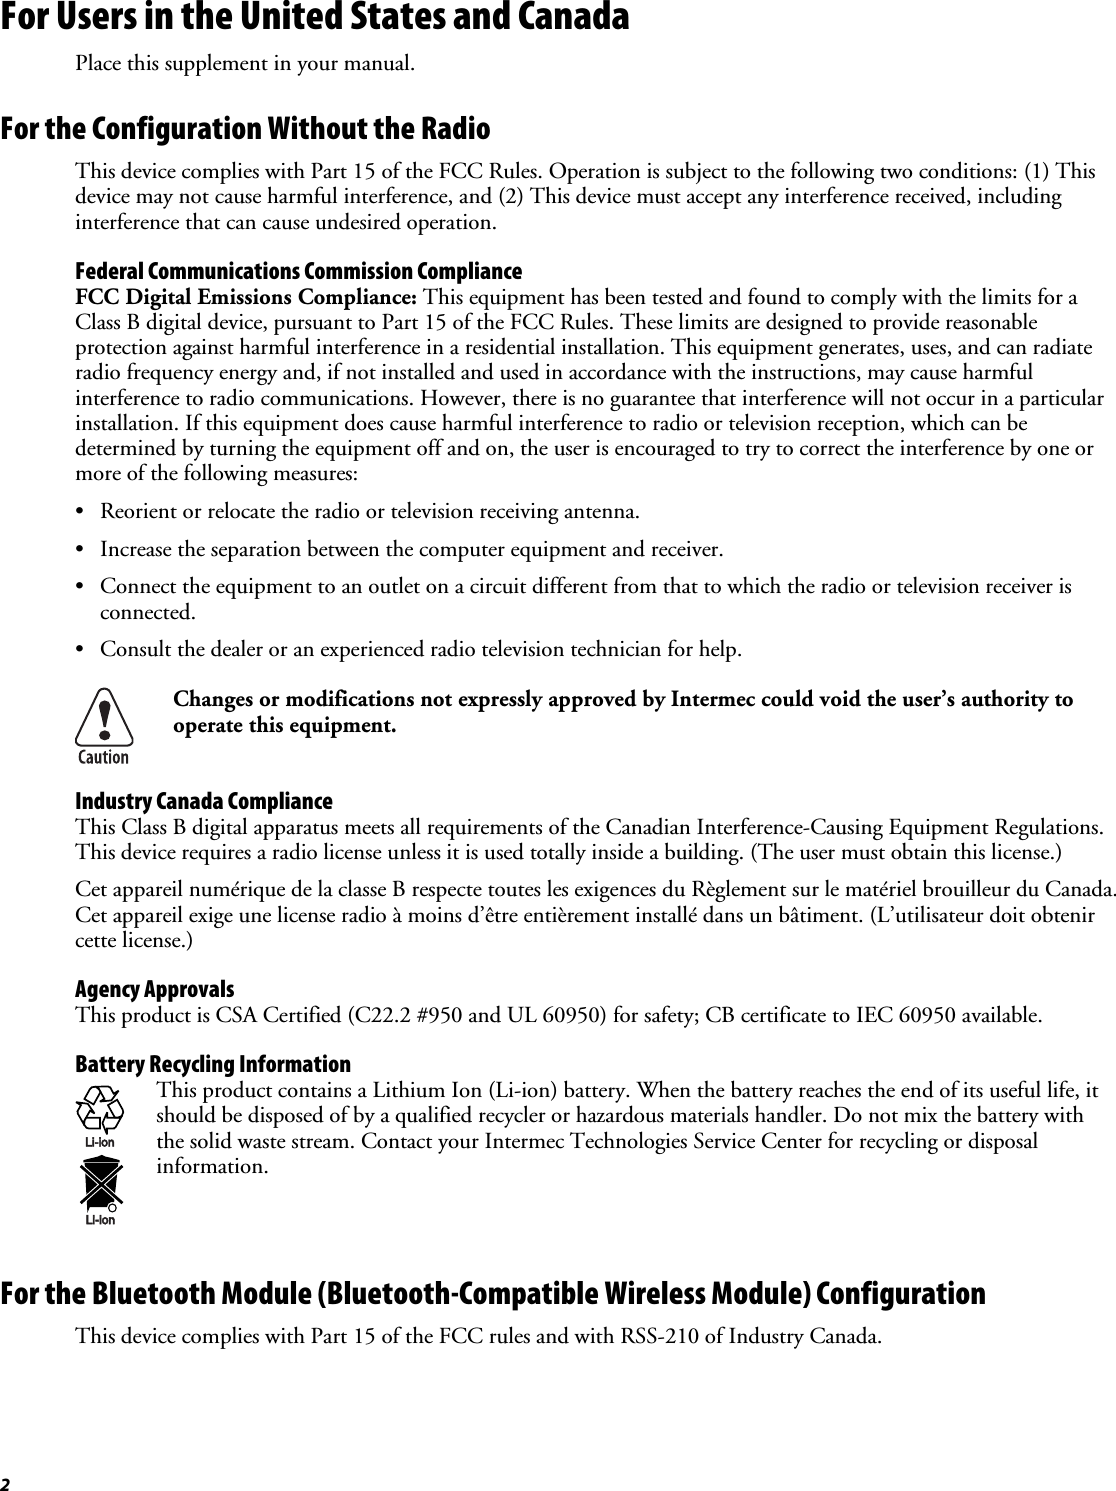 2 For Users in the United States and Canada Place this supplement in your manual. For the Configuration Without the Radio This device complies with Part 15 of the FCC Rules. Operation is subject to the following two conditions: (1) This device may not cause harmful interference, and (2) This device must accept any interference received, including interference that can cause undesired operation. Federal Communications Commission Compliance  FCC Digital Emissions Compliance: This equipment has been tested and found to comply with the limits for a Class B digital device, pursuant to Part 15 of the FCC Rules. These limits are designed to provide reasonable protection against harmful interference in a residential installation. This equipment generates, uses, and can radiate radio frequency energy and, if not installed and used in accordance with the instructions, may cause harmful interference to radio communications. However, there is no guarantee that interference will not occur in a particular installation. If this equipment does cause harmful interference to radio or television reception, which can be determined by turning the equipment off and on, the user is encouraged to try to correct the interference by one or more of the following measures: •  Reorient or relocate the radio or television receiving antenna. •  Increase the separation between the computer equipment and receiver. •  Connect the equipment to an outlet on a circuit different from that to which the radio or television receiver is connected. •  Consult the dealer or an experienced radio television technician for help.  Changes or modifications not expressly approved by Intermec could void the user’s authority to operate this equipment. Industry Canada Compliance This Class B digital apparatus meets all requirements of the Canadian Interference-Causing Equipment Regulations. This device requires a radio license unless it is used totally inside a building. (The user must obtain this license.) Cet appareil numérique de la classe B respecte toutes les exigences du Règlement sur le matériel brouilleur du Canada. Cet appareil exige une license radio à moins d’être entièrement installé dans un bâtiment. (L’utilisateur doit obtenir cette license.) Agency Approvals This product is CSA Certified (C22.2 #950 and UL 60950) for safety; CB certificate to IEC 60950 available. Battery Recycling Information Li-ionLi-ion This product contains a Lithium Ion (Li-ion) battery. When the battery reaches the end of its useful life, it should be disposed of by a qualified recycler or hazardous materials handler. Do not mix the battery with the solid waste stream. Contact your Intermec Technologies Service Center for recycling or disposal information. For the Bluetooth Module (Bluetooth-Compatible Wireless Module) Configuration This device complies with Part 15 of the FCC rules and with RSS-210 of Industry Canada. 